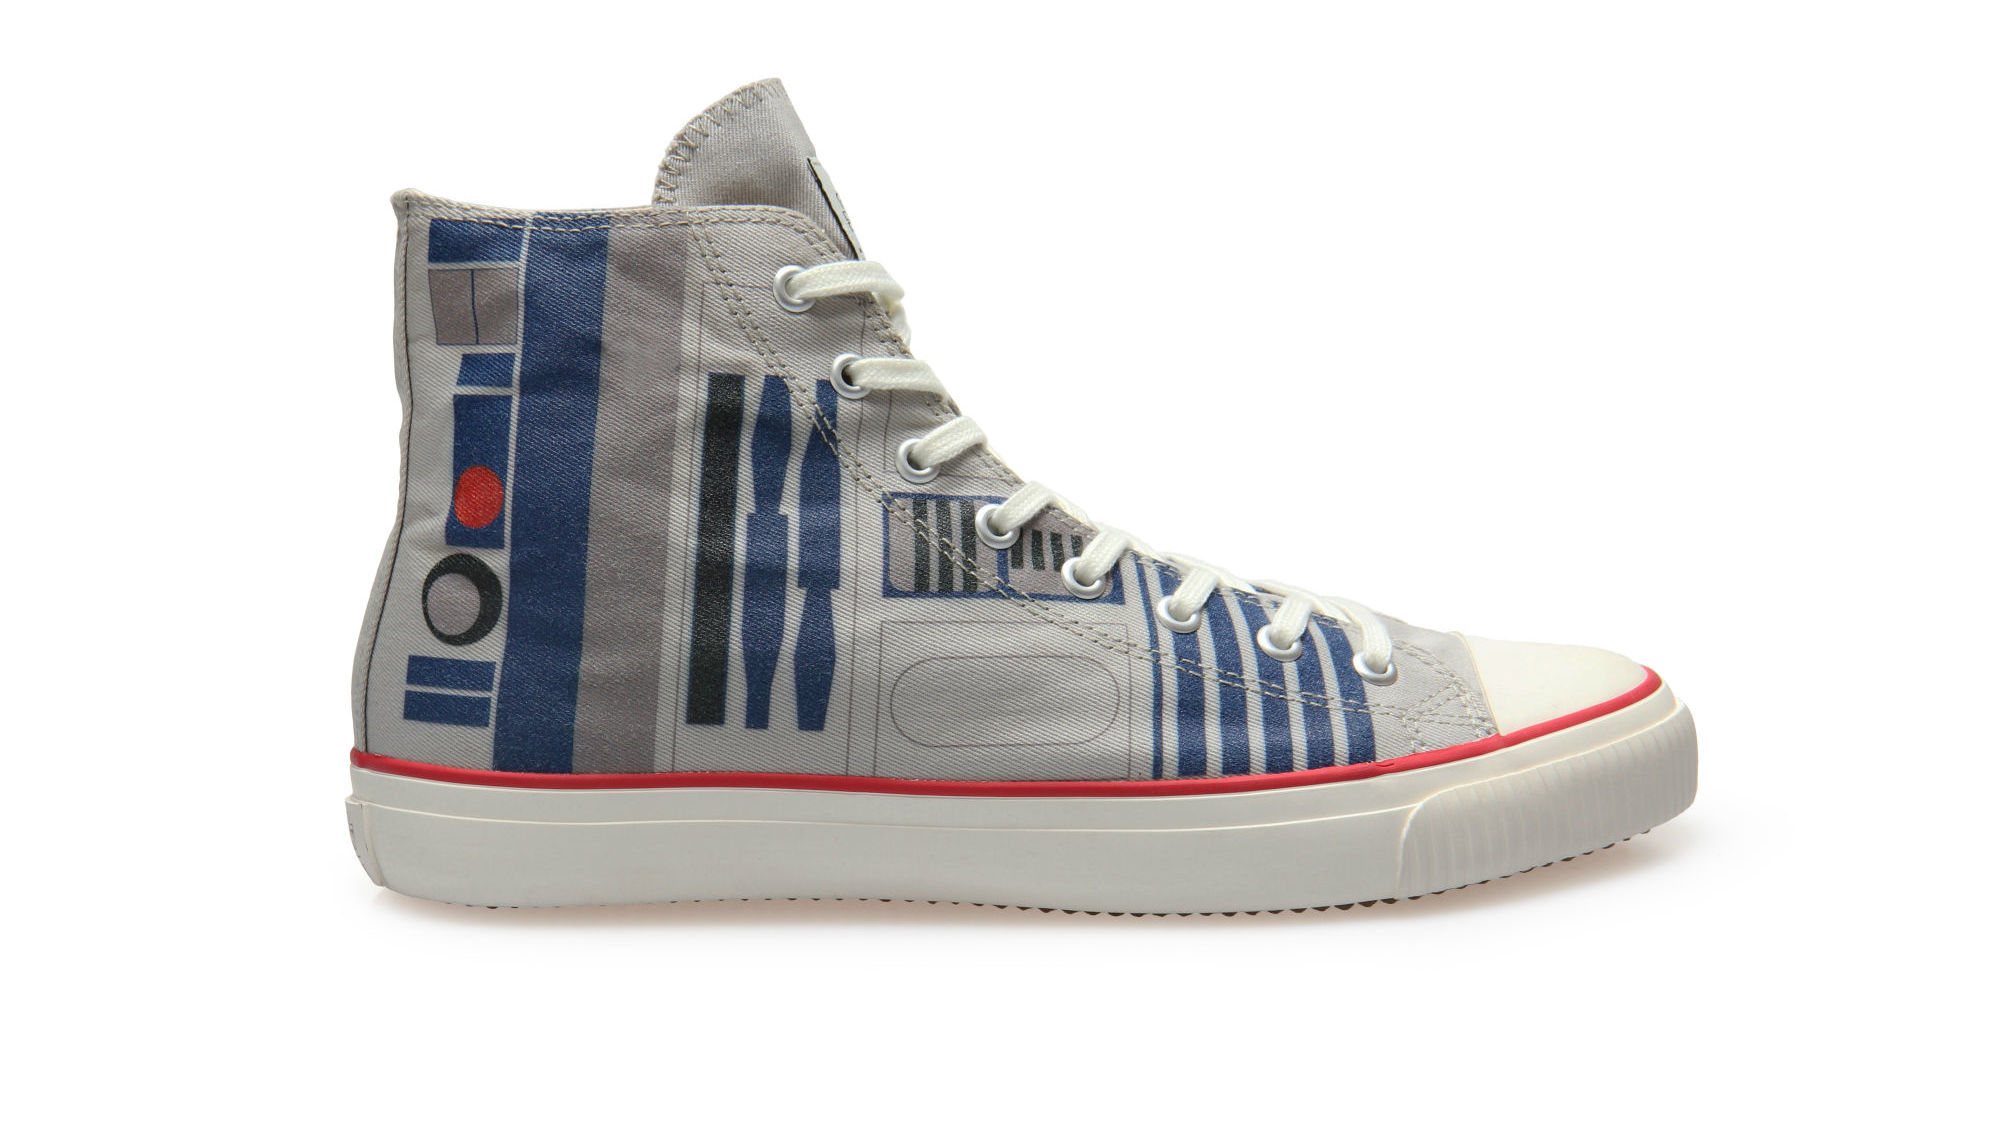 Roll Like A Boss In These Brand New R2-D2 Hightops